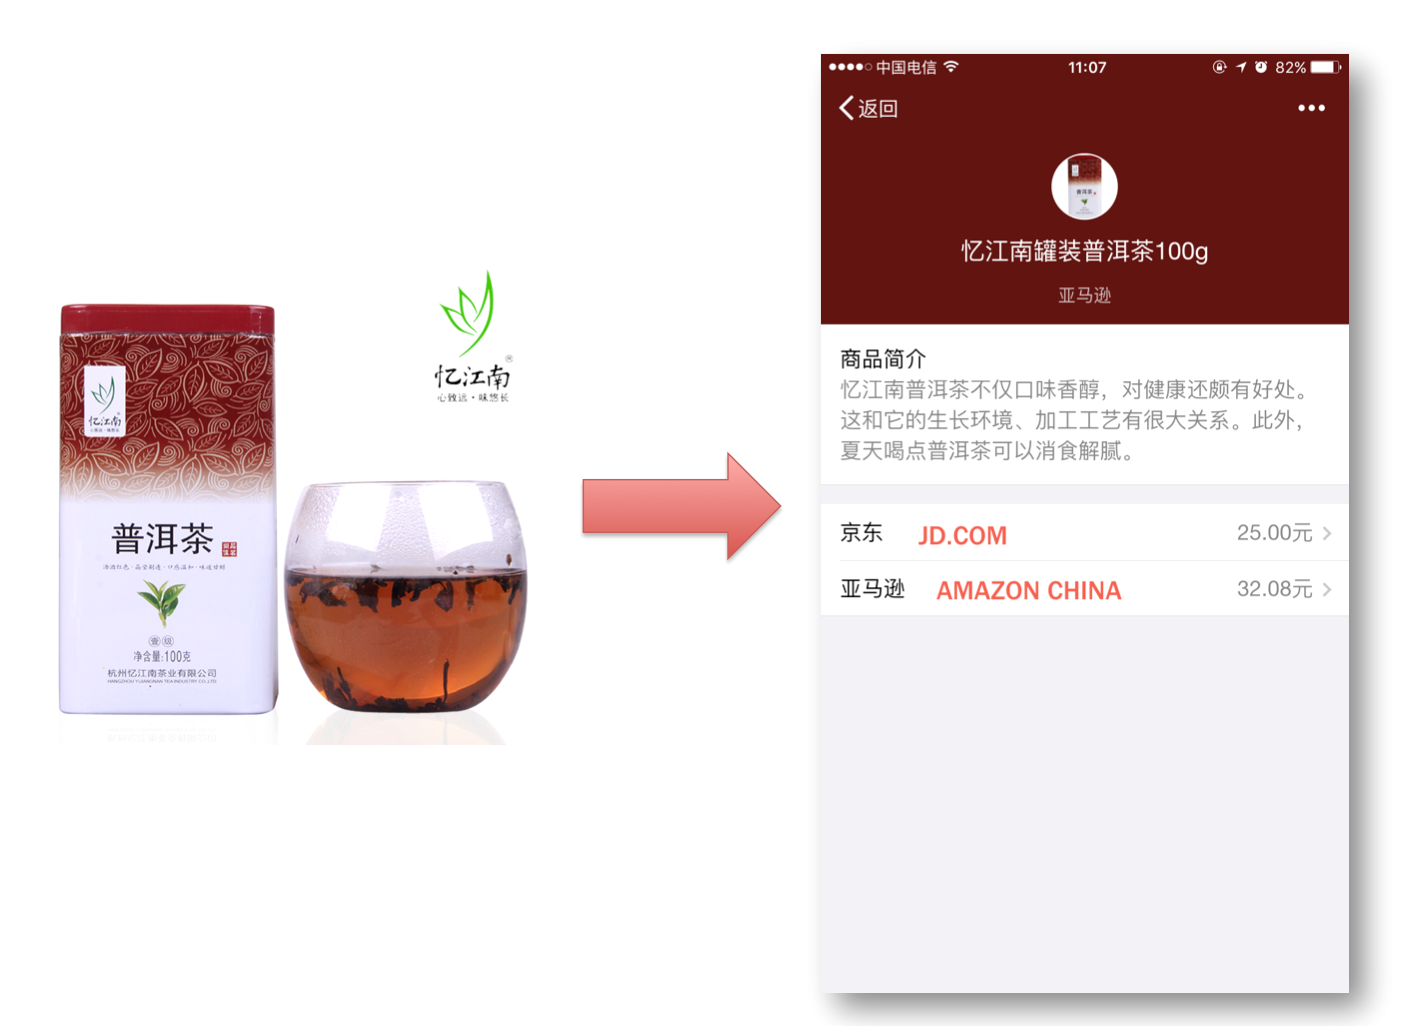 WeChat eCommerce barcode scan